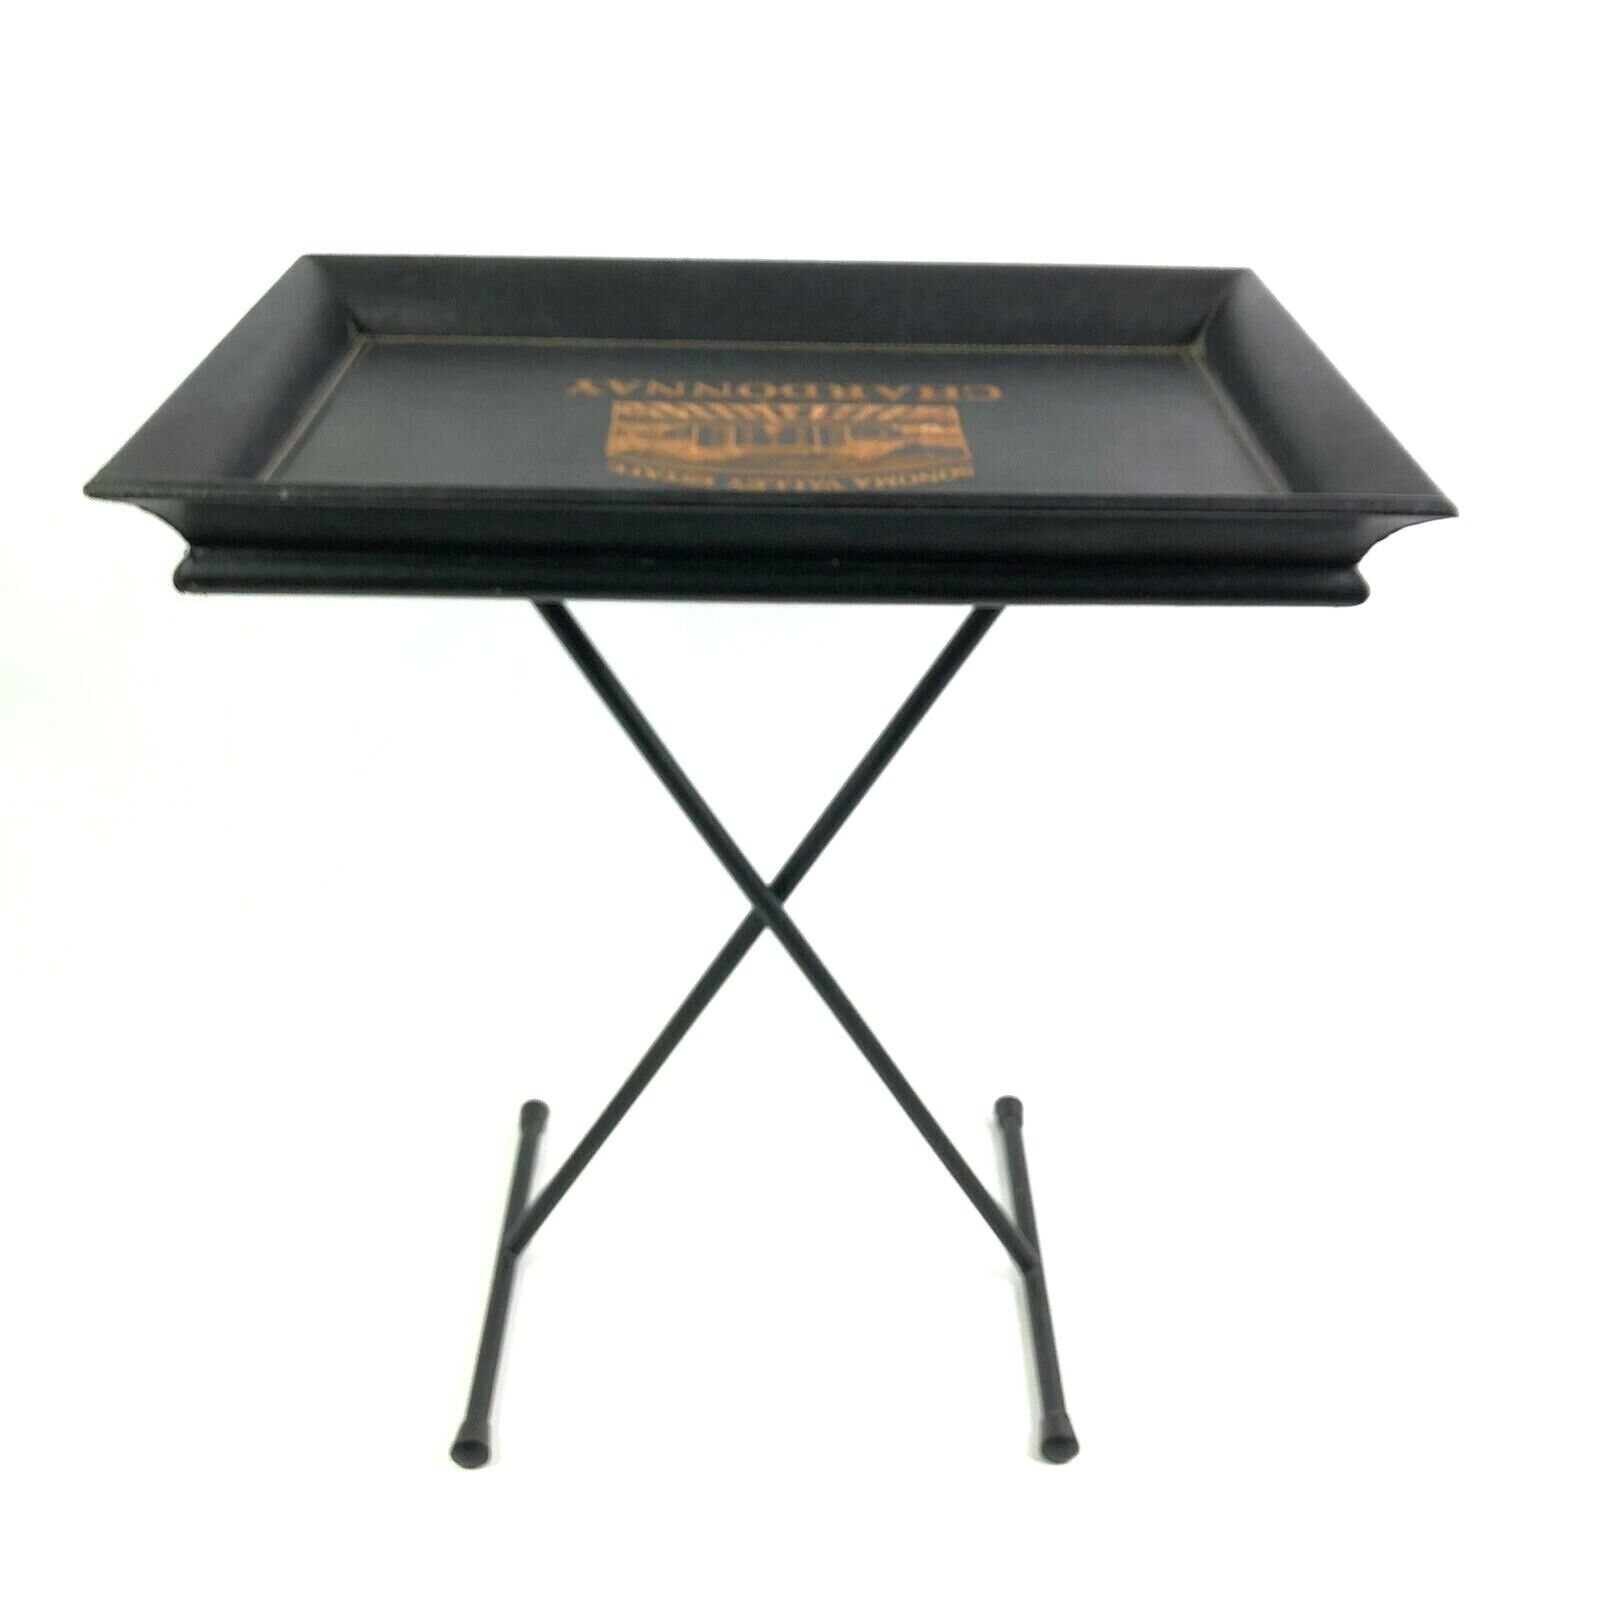 Sonoma Valley Estate Chardonnay Black Leather Serving Tray with Stand 